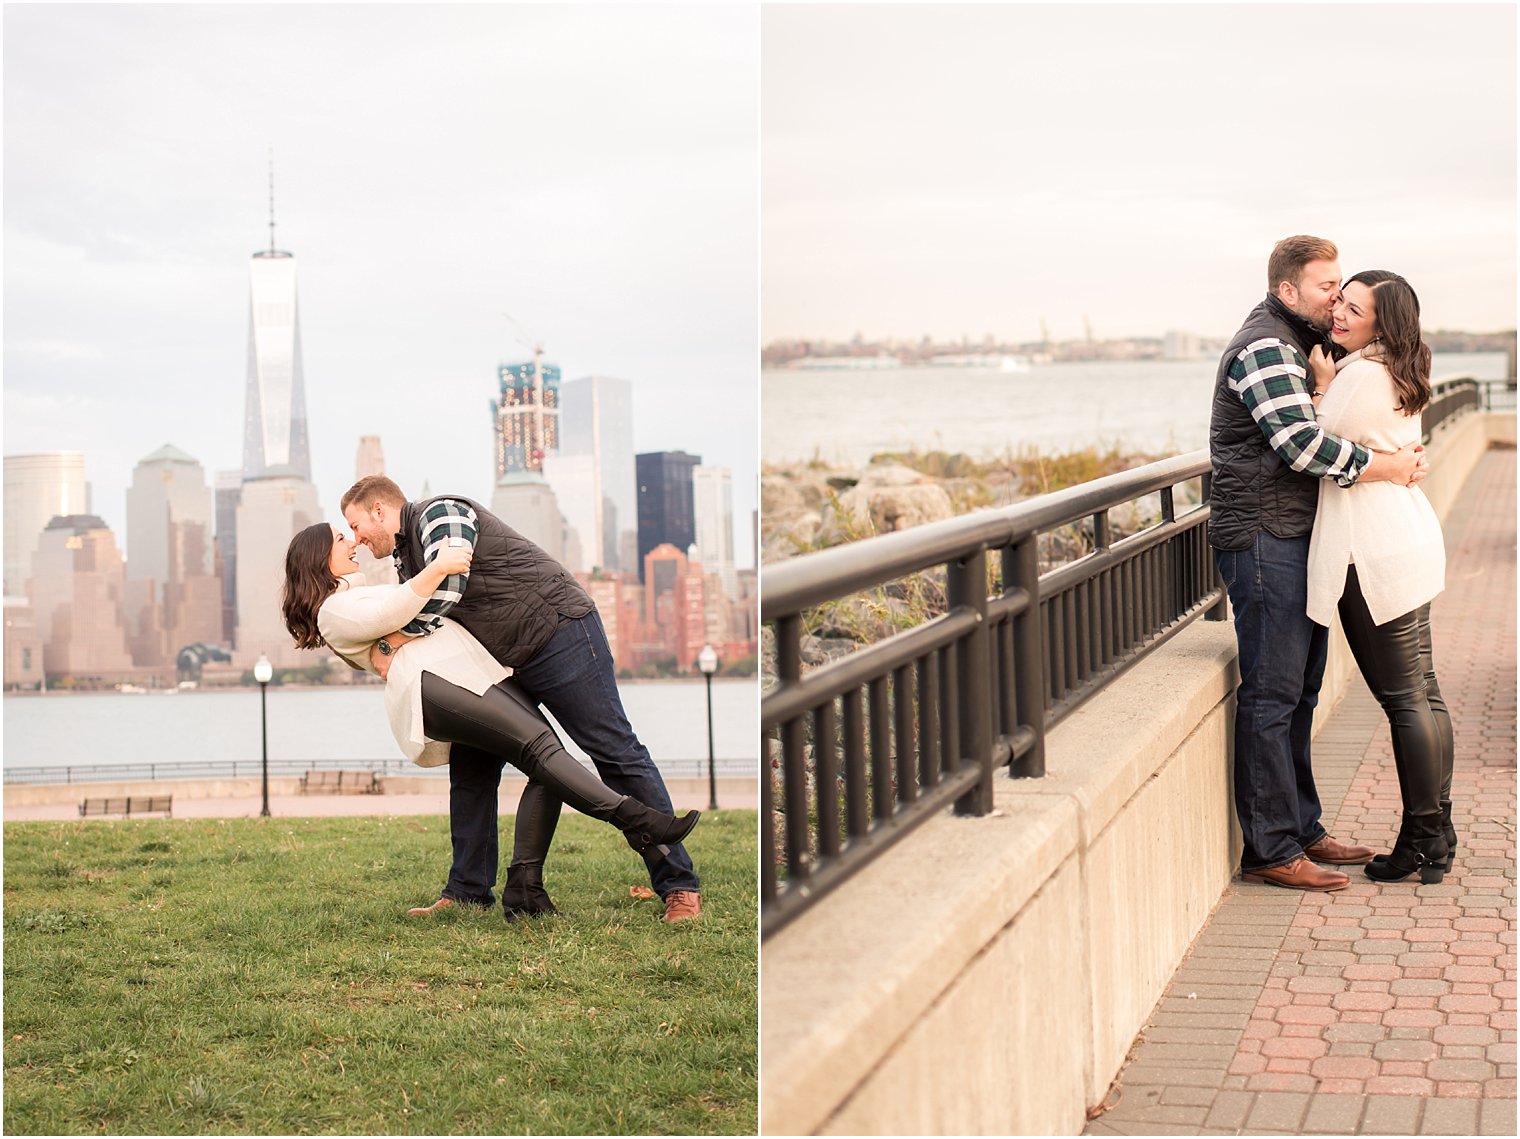 Fun engagement photos with NYC skyline